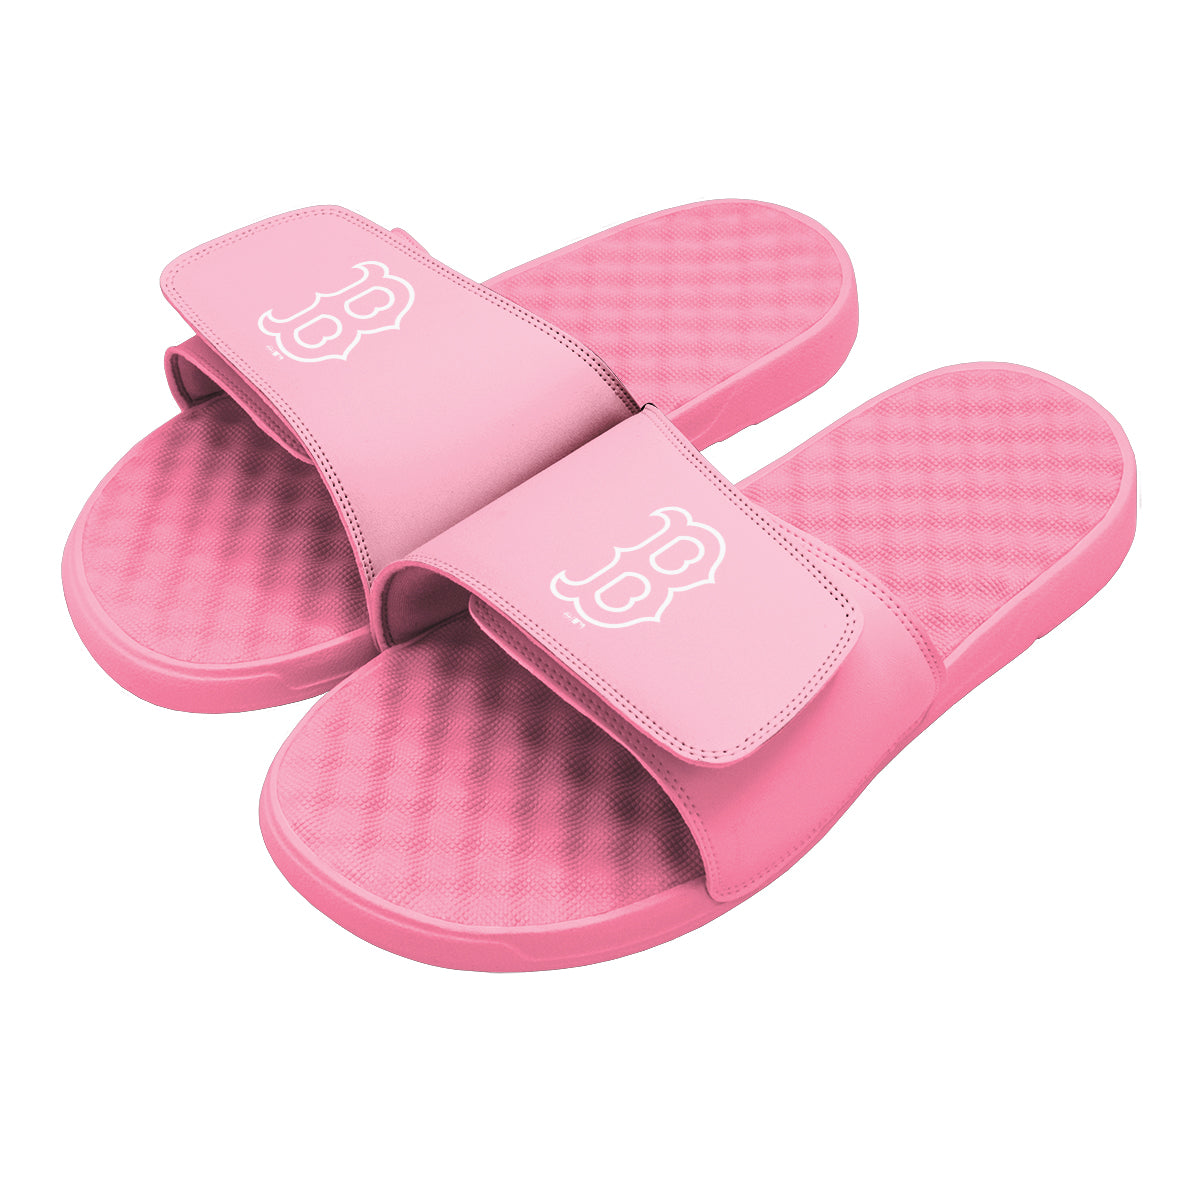 Boston Red Sox Primary Pink Slides